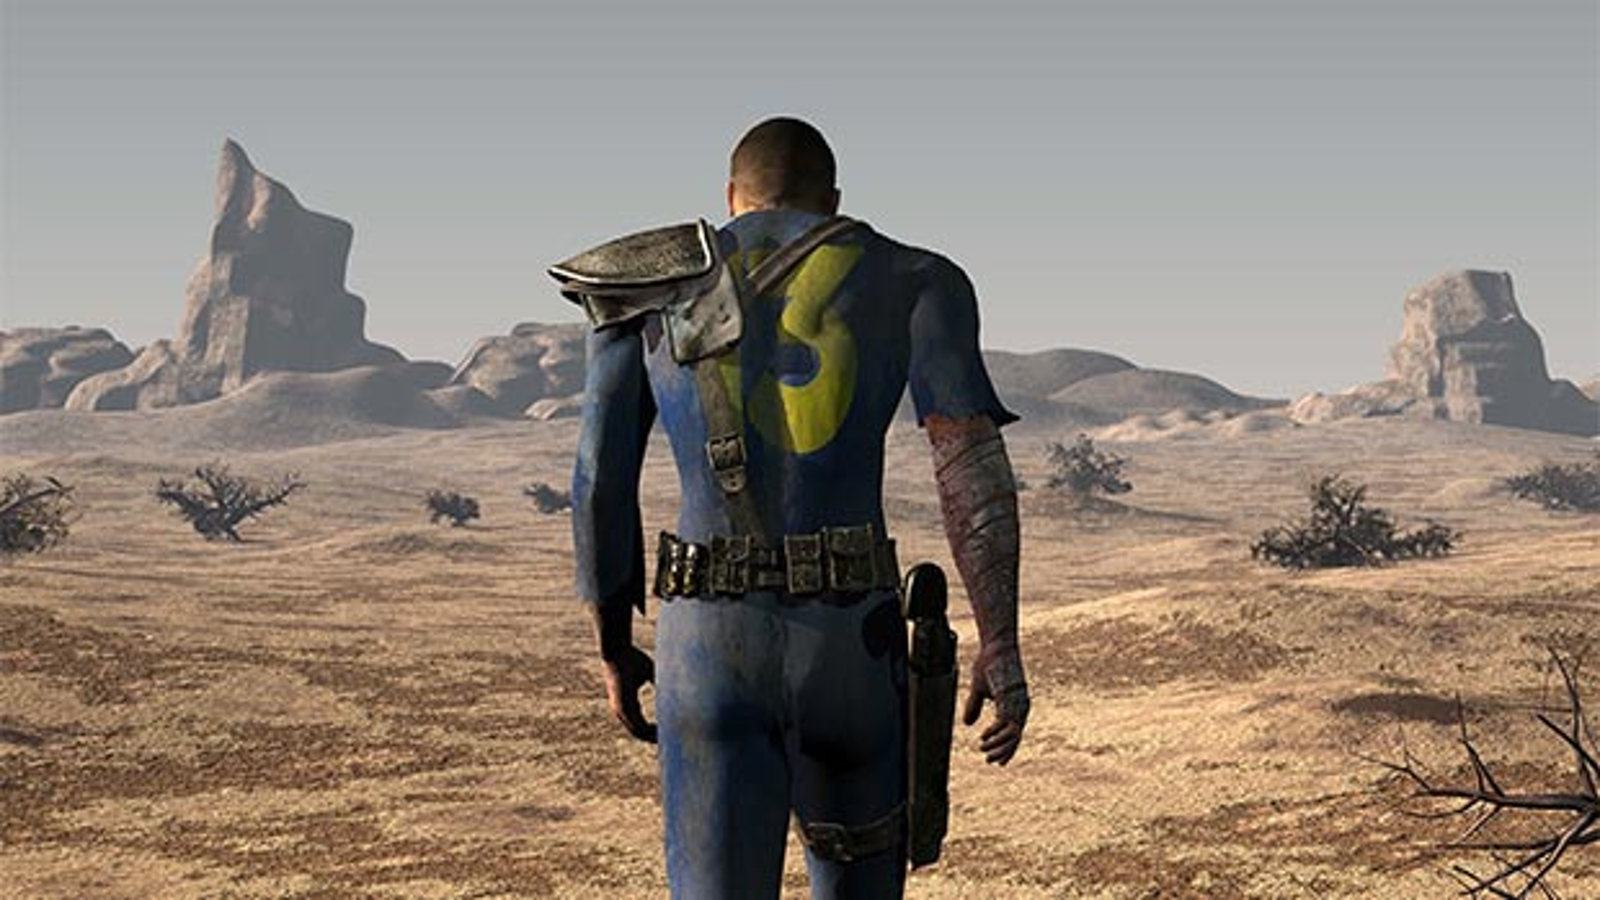 HAPPY 13TH BIRTHDAY TO ONE OF THE BEST GAMES EVER! : fnv